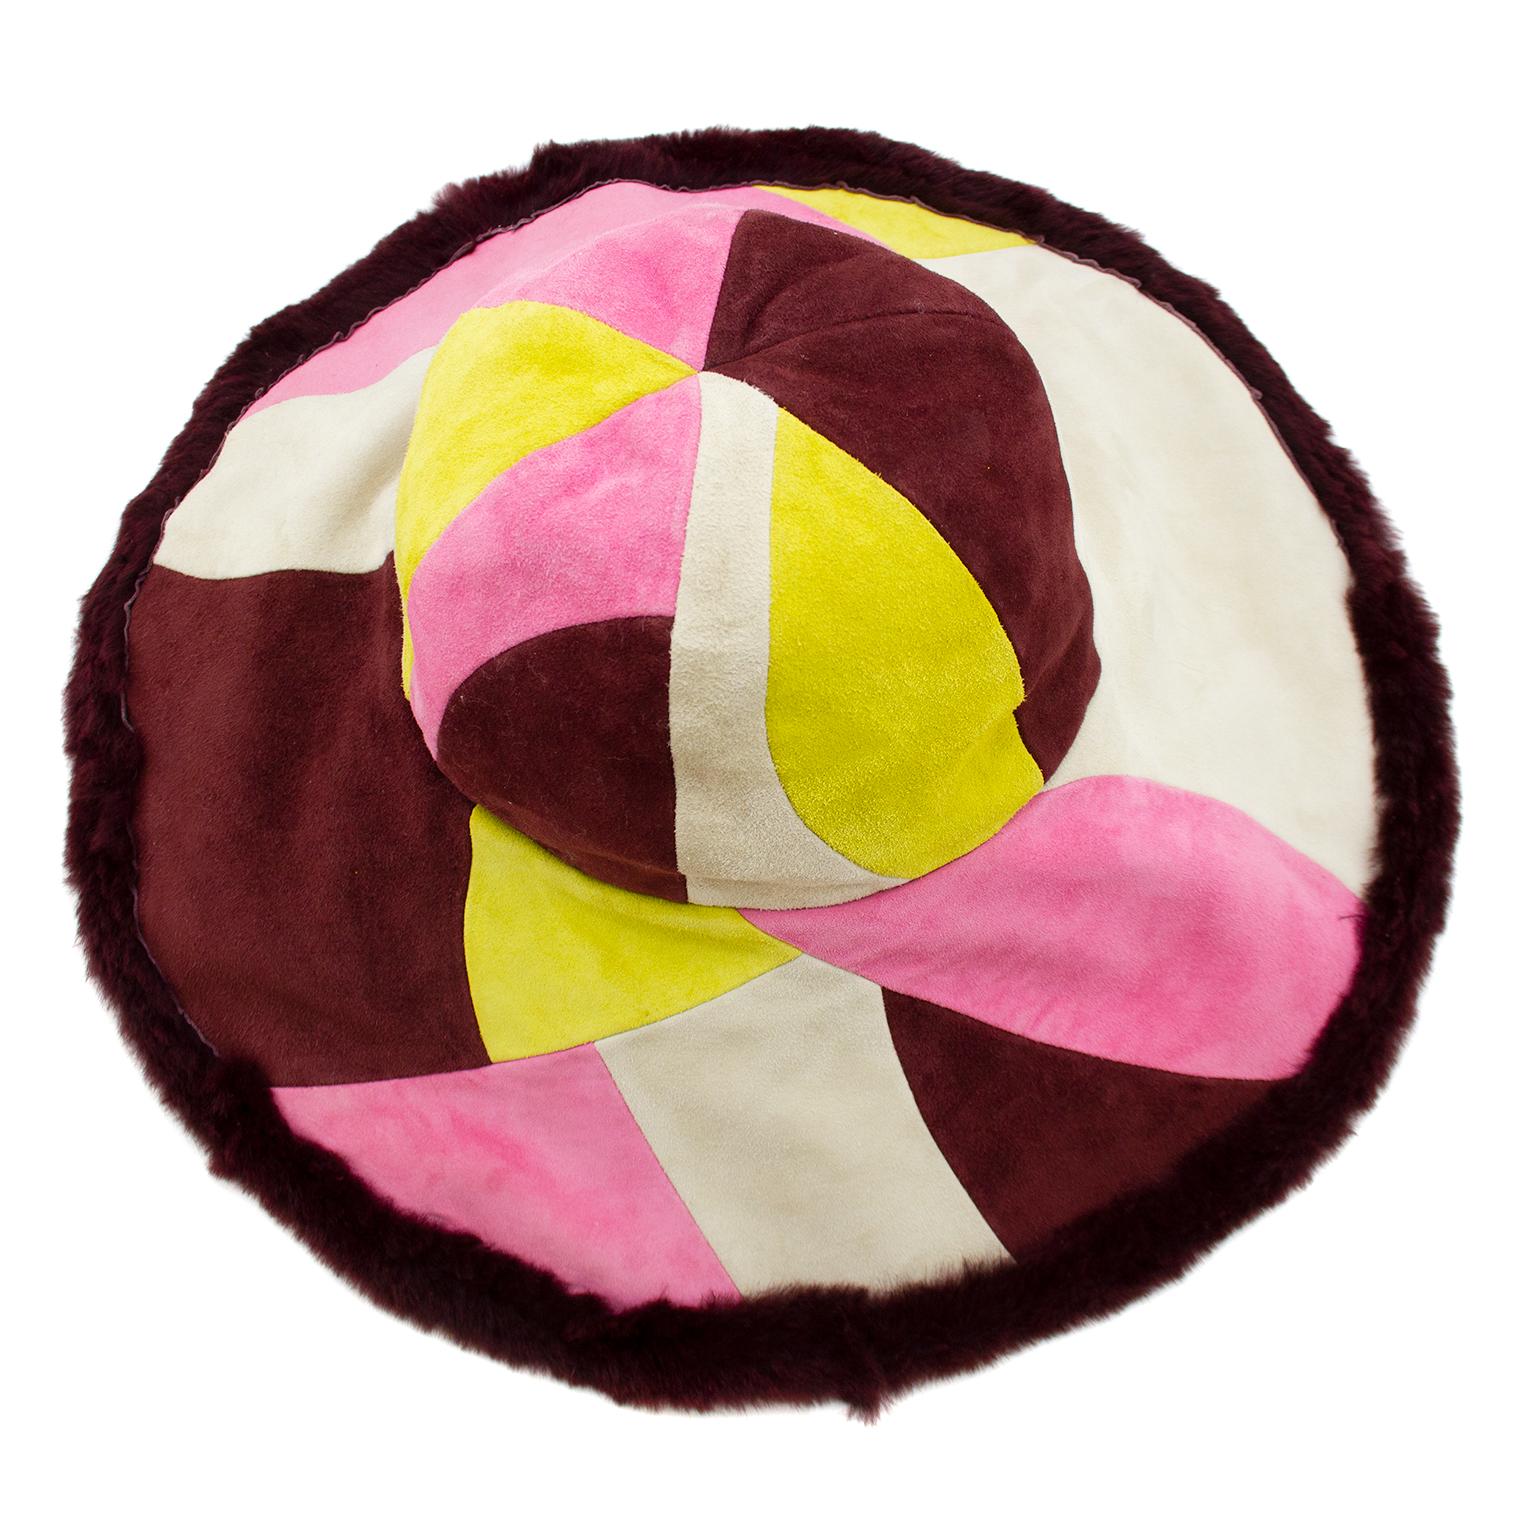 1990s Emilio Pucci six panel wide brim hat. The iconic Pucci pattern made out of patchwork suede in pink, cream, maroon and yellow. Maroon sheared rabbit trim and interior. Very chic winter chapeau. Made in Italy. Excellent vintage condition - tags